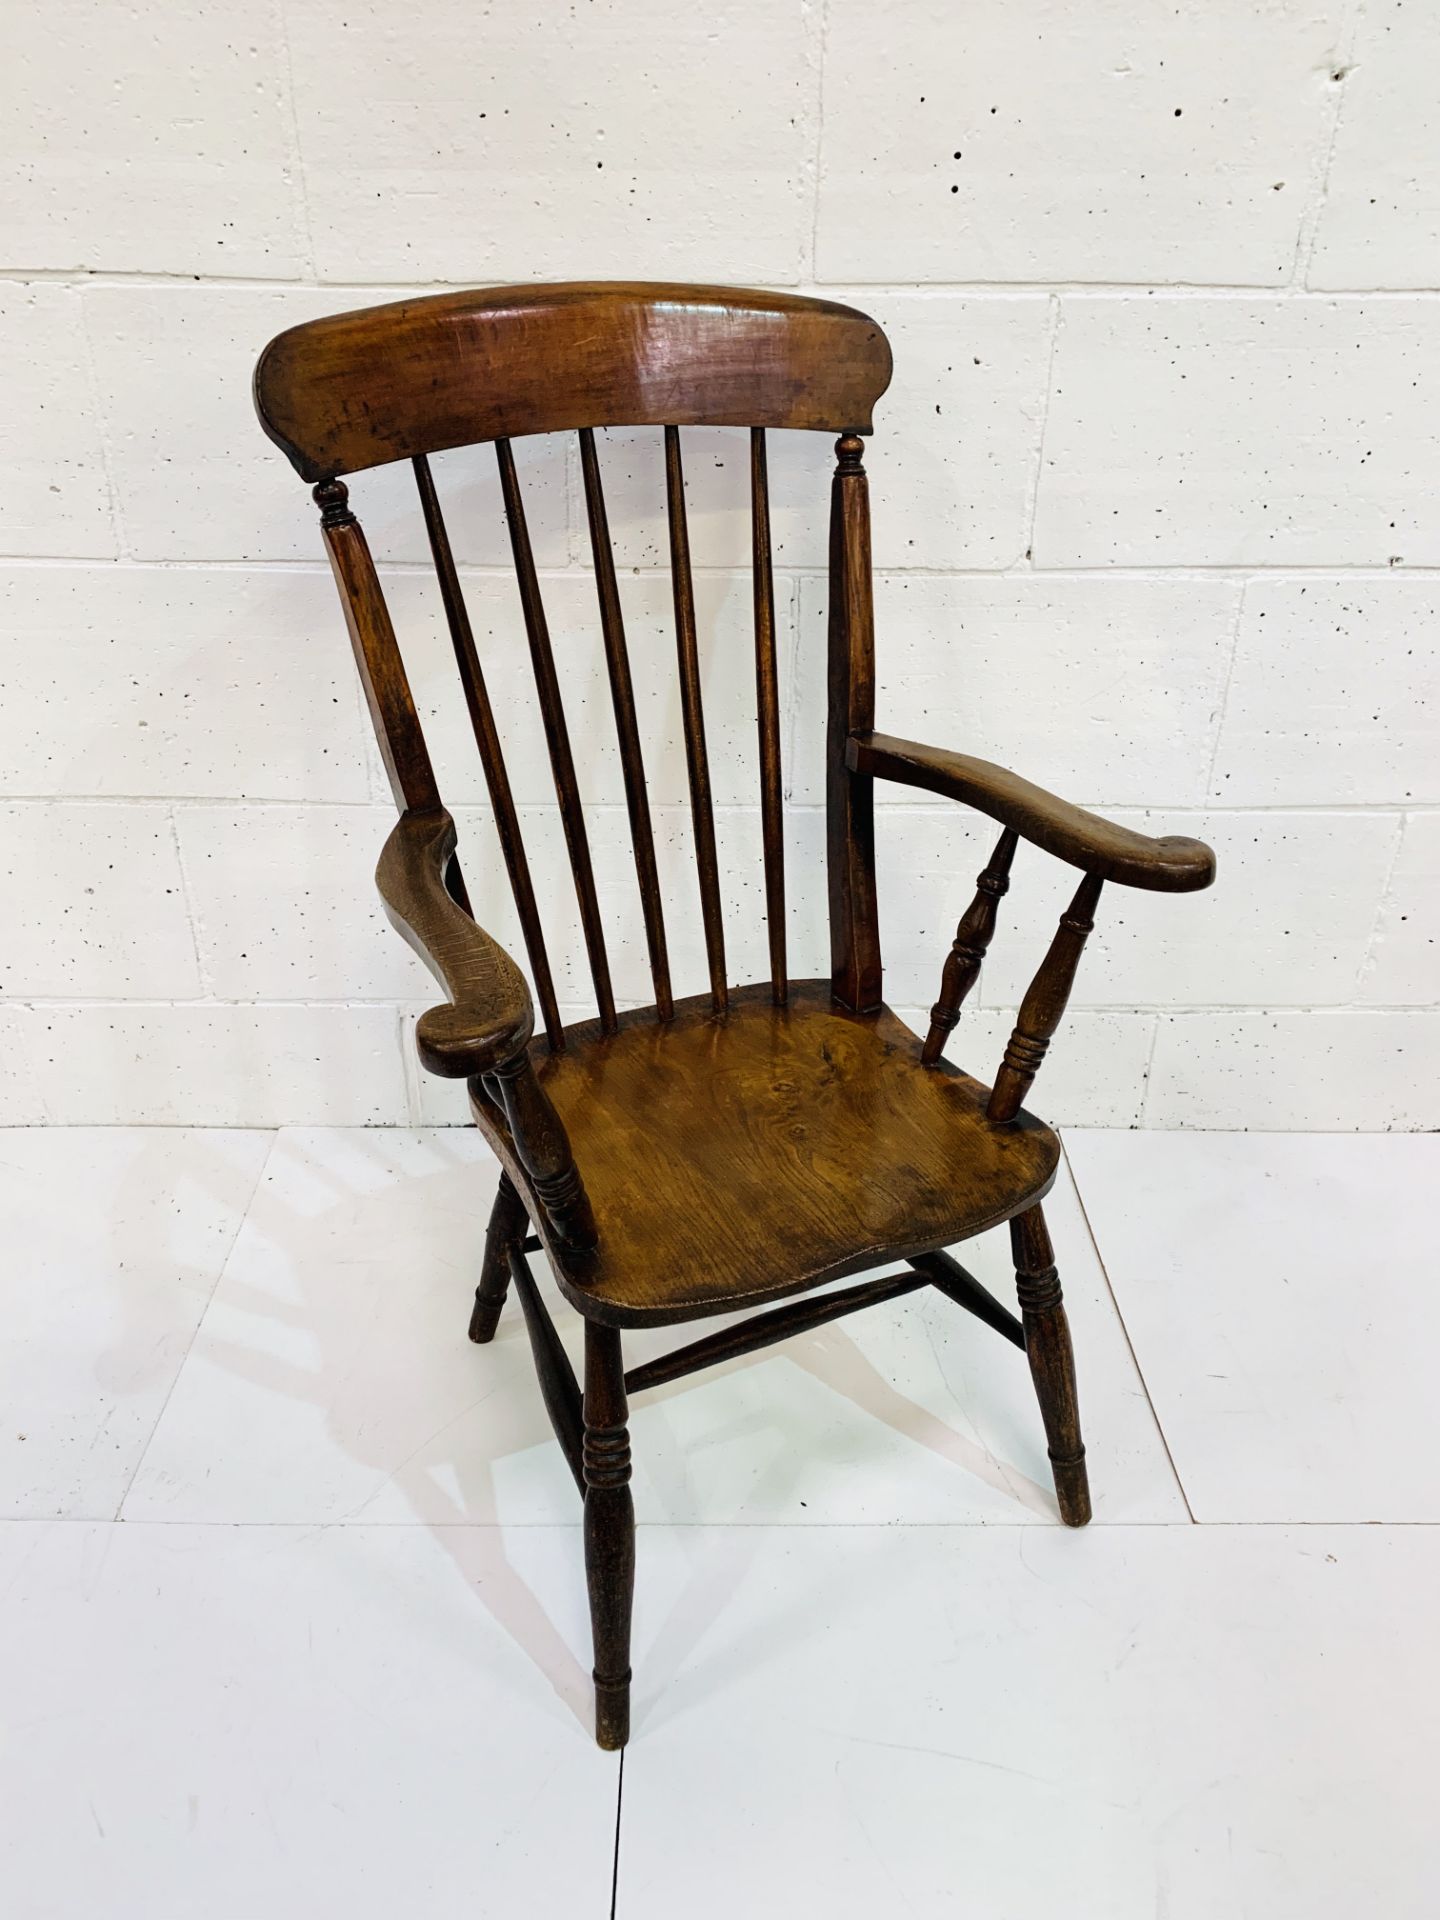 Elm seat high back farmhouse open armchair with spindle back.